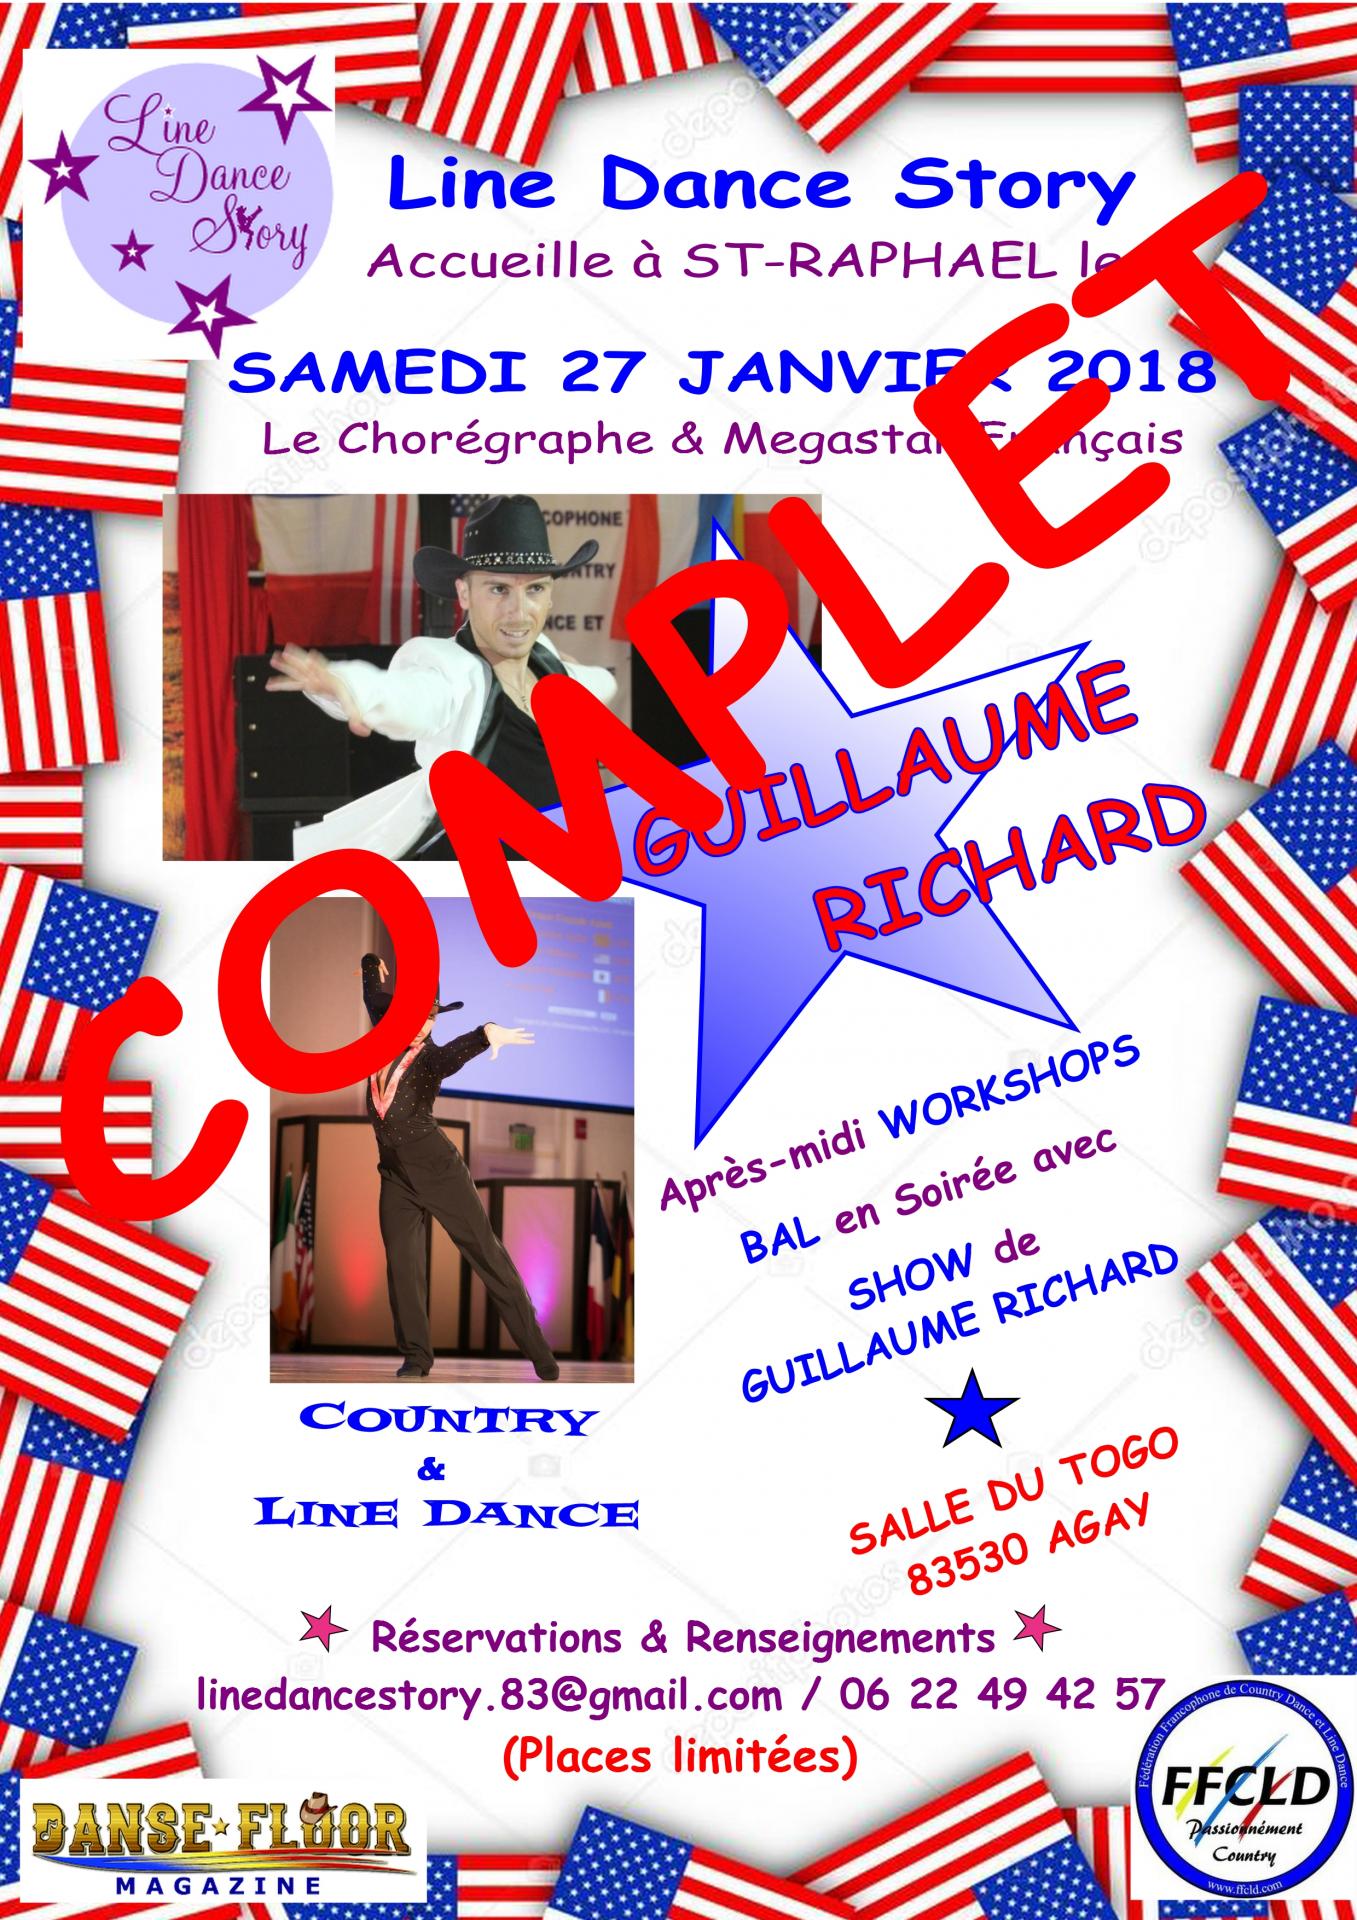 Guillaume richard complet